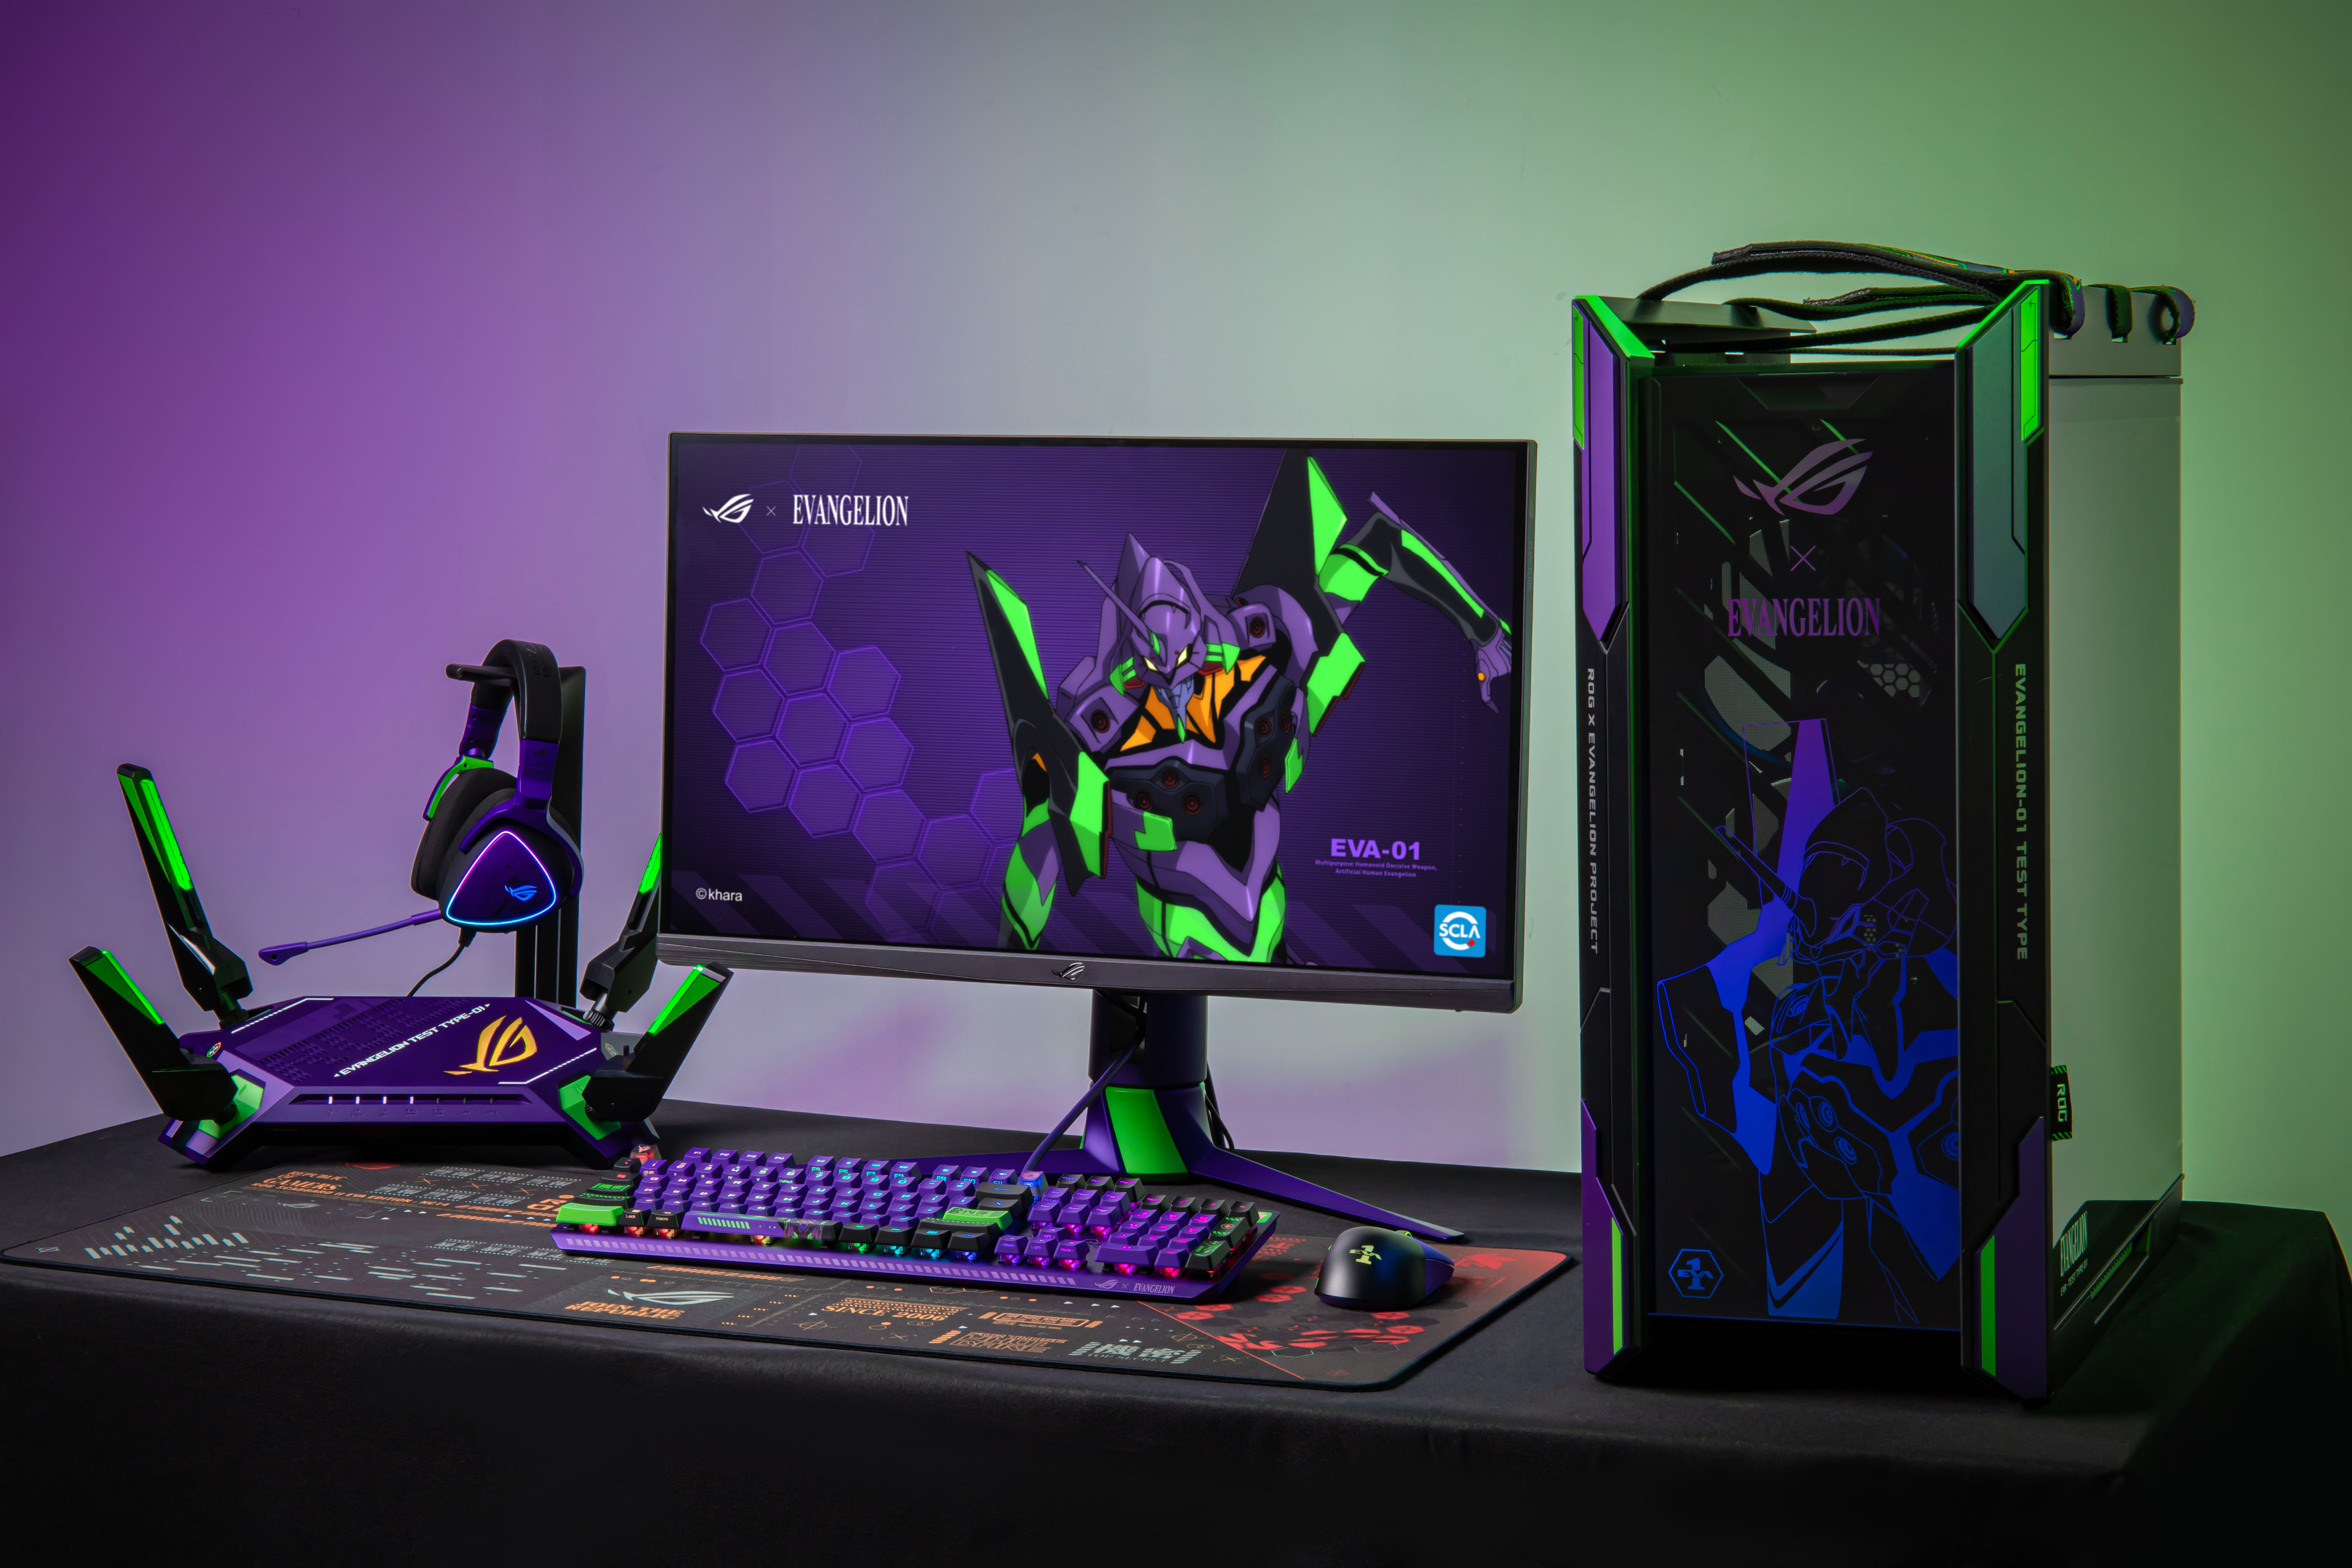 Republic Of Gamers ASUS PC Build PC Cases Evangelion Unit 01 Mechanical Keyboard 6521x4347